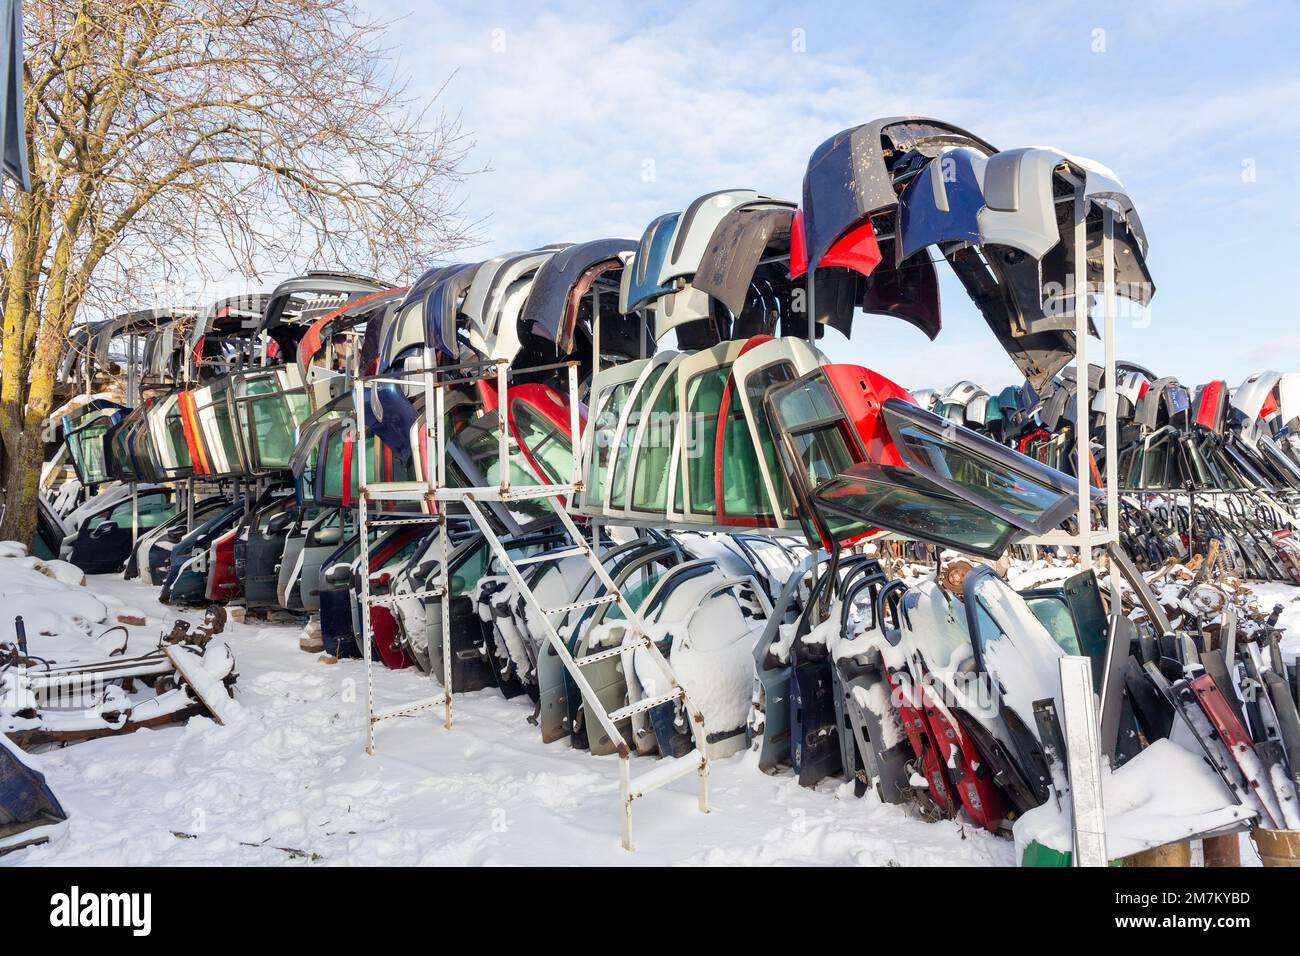 Disassembled cars on a car dump are on sale for spare parts. A stack of doors and bumpers. Trade in used spare parts is a common business in developin Stock Photo